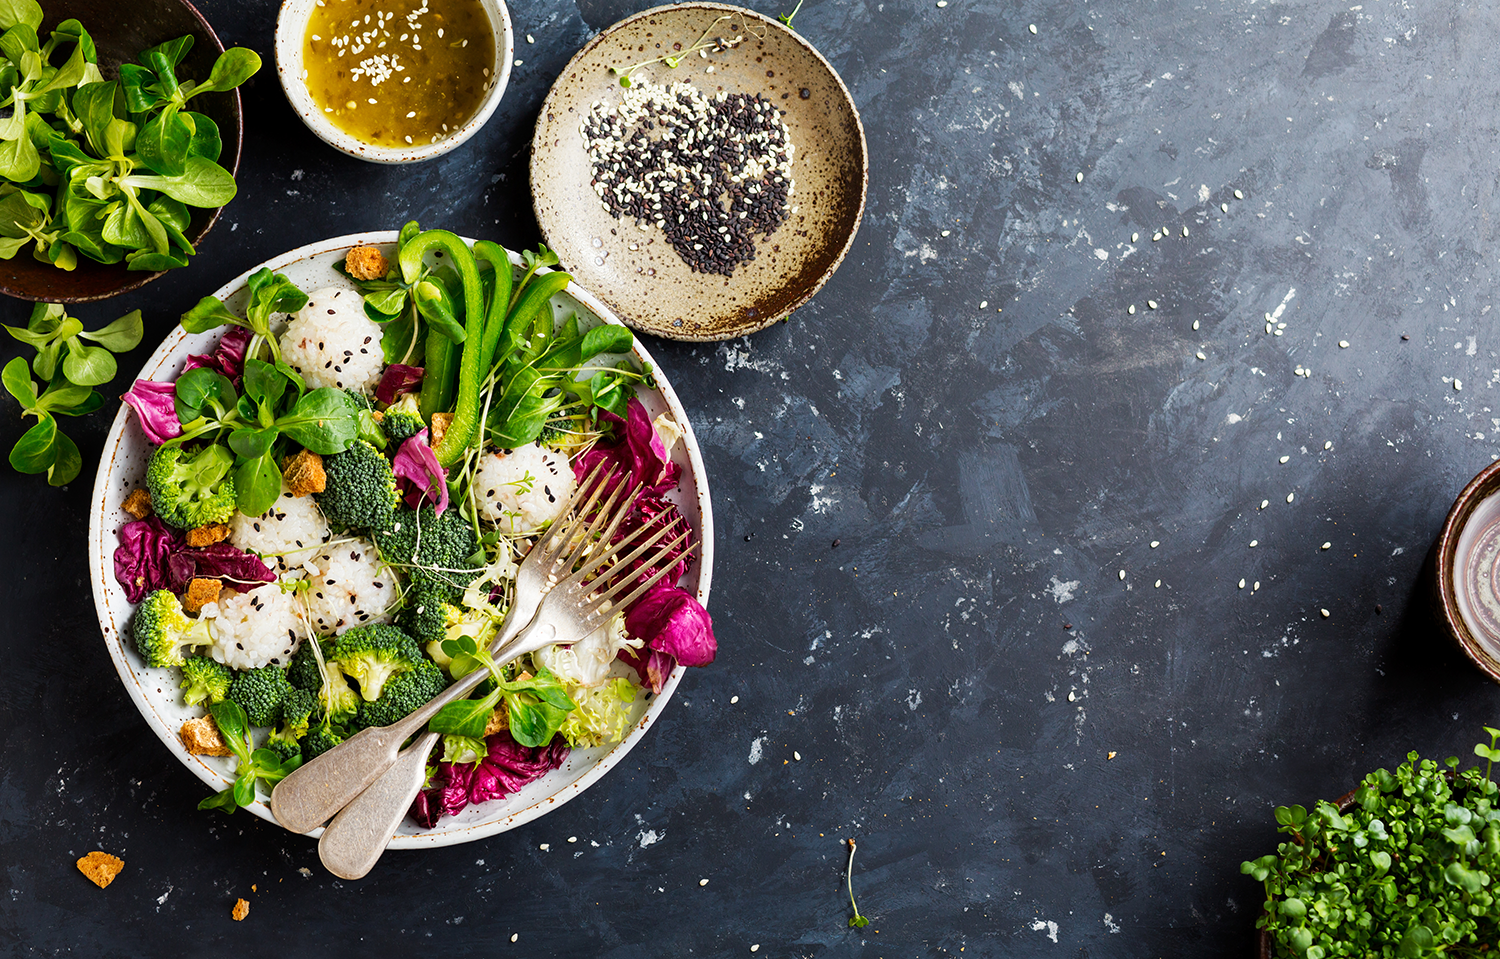 How Restaurants can market healthy food menus to health enthusiasts